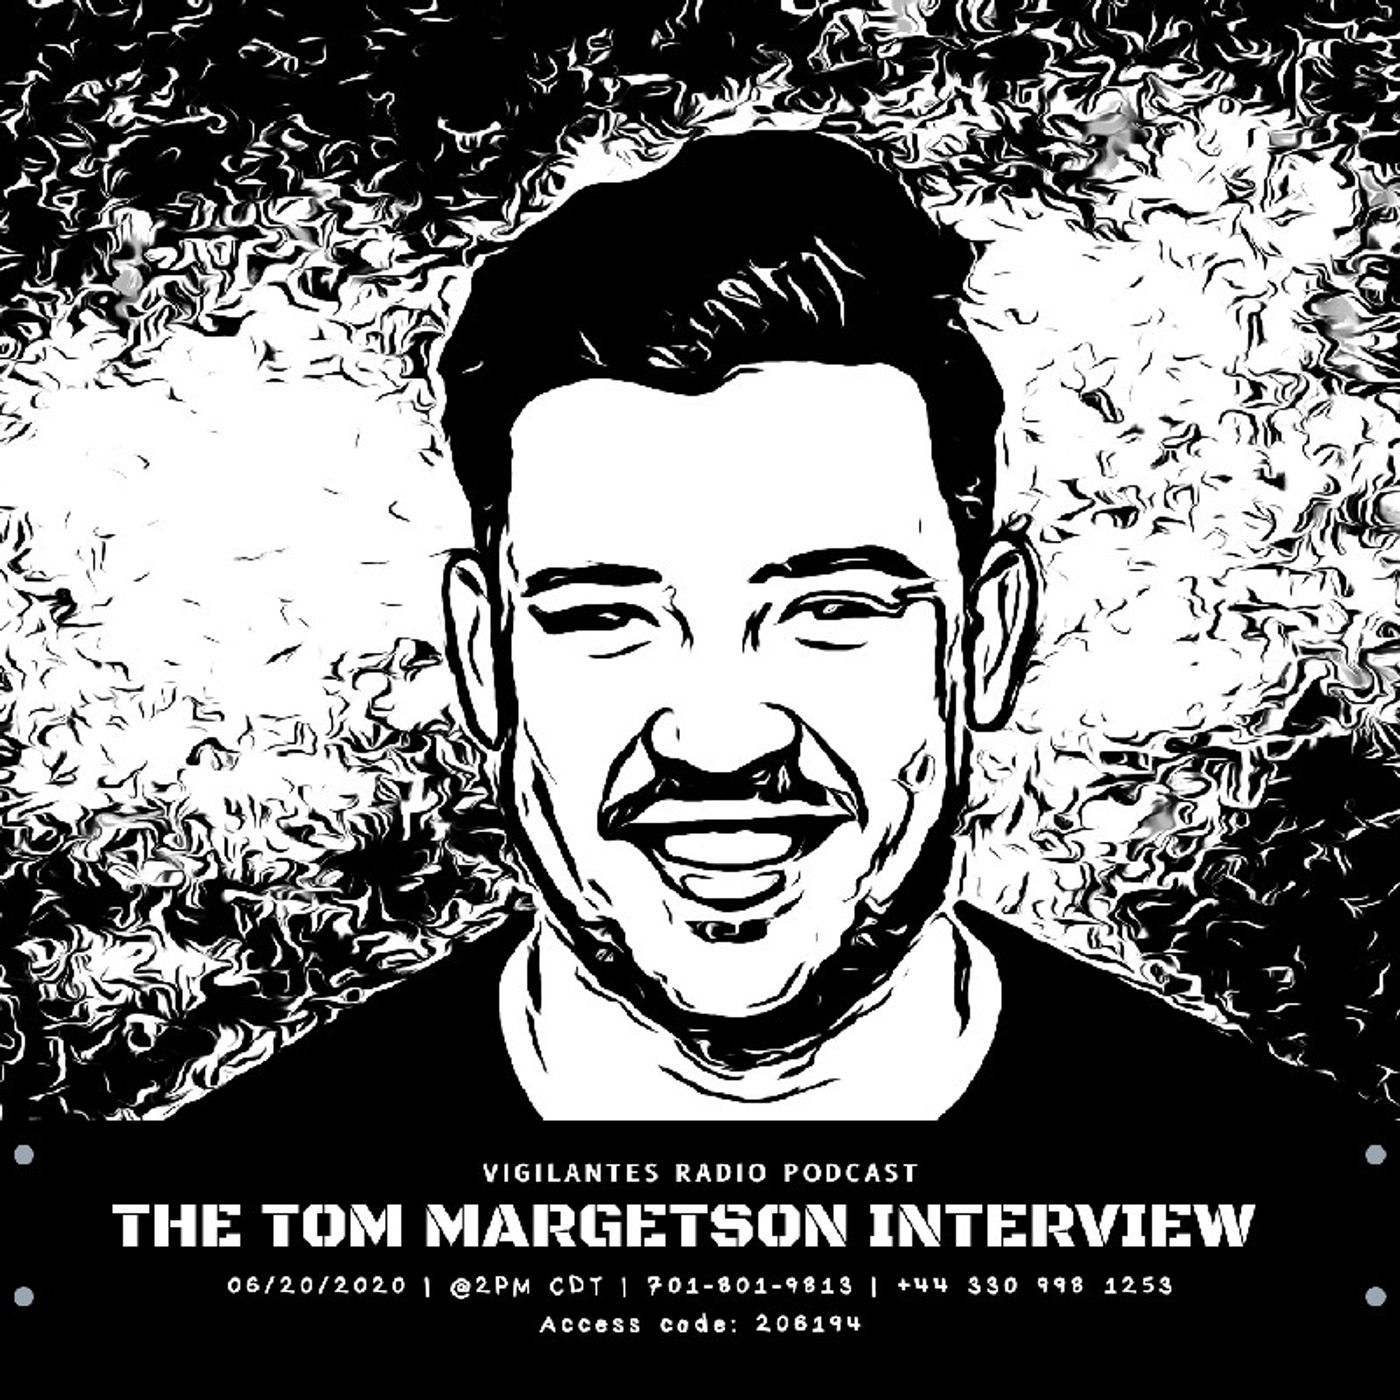 The Tom Margetson Interview. Image